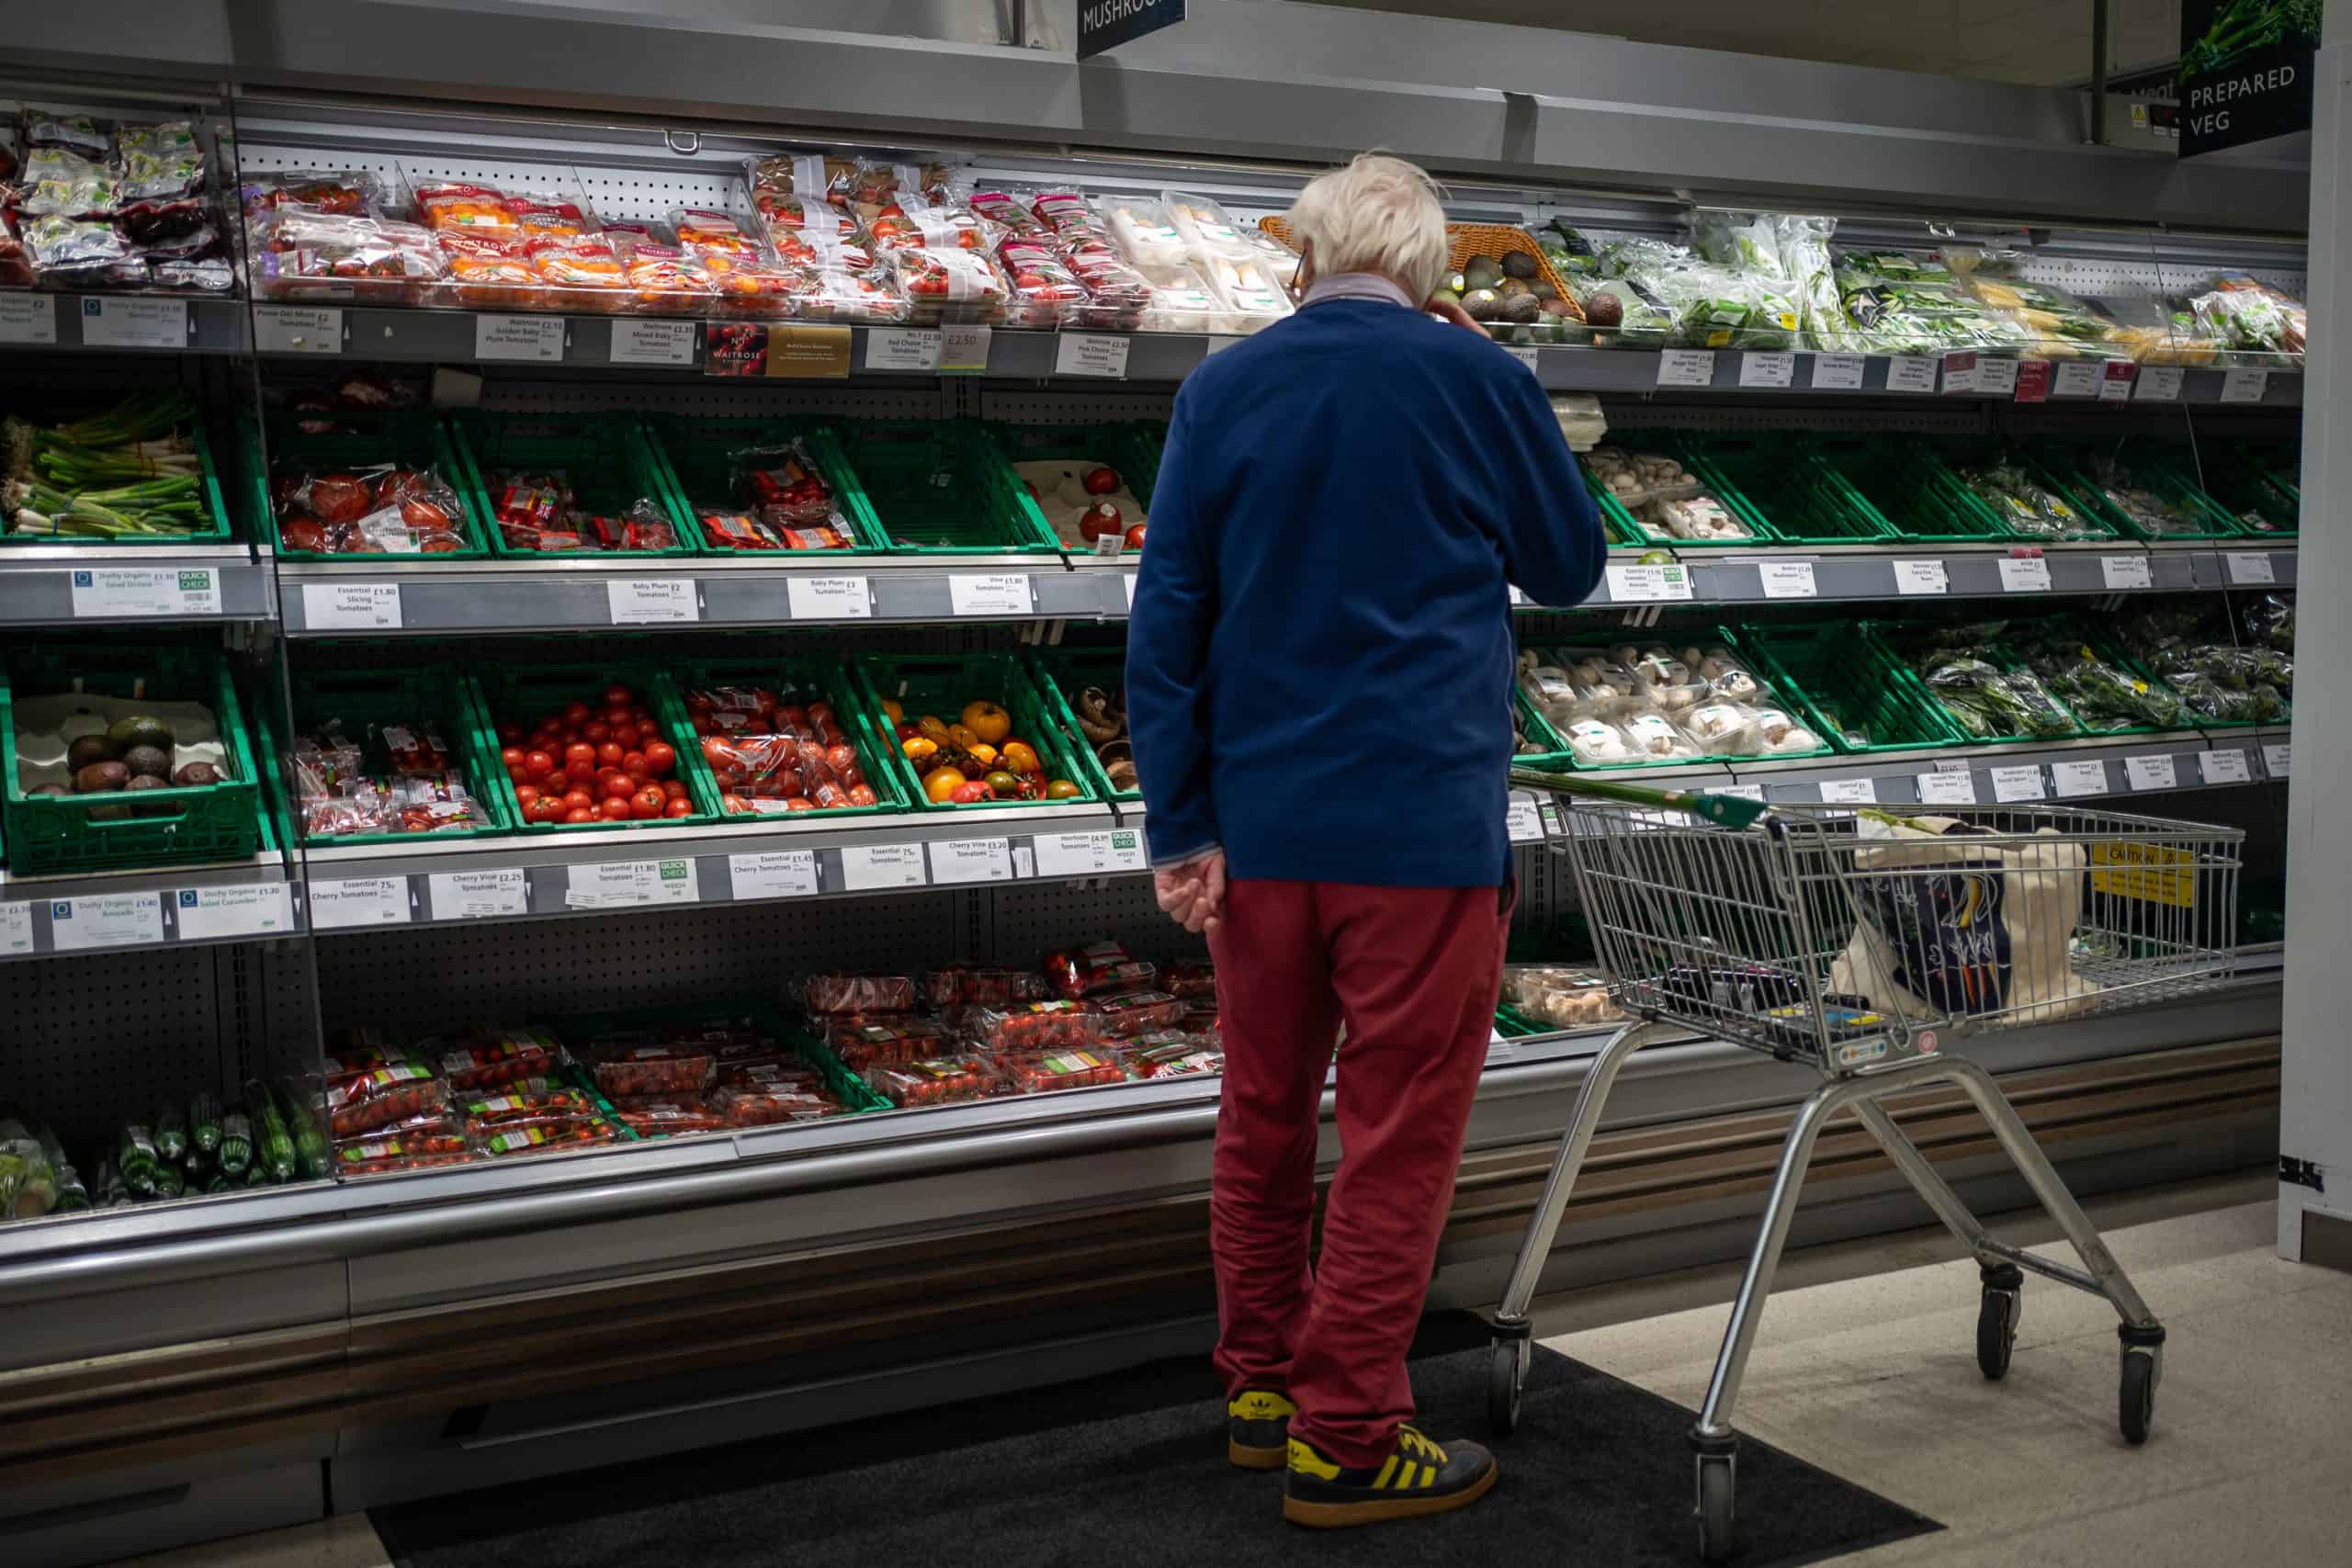 Inflation hits double figures and reaches new 40-year high